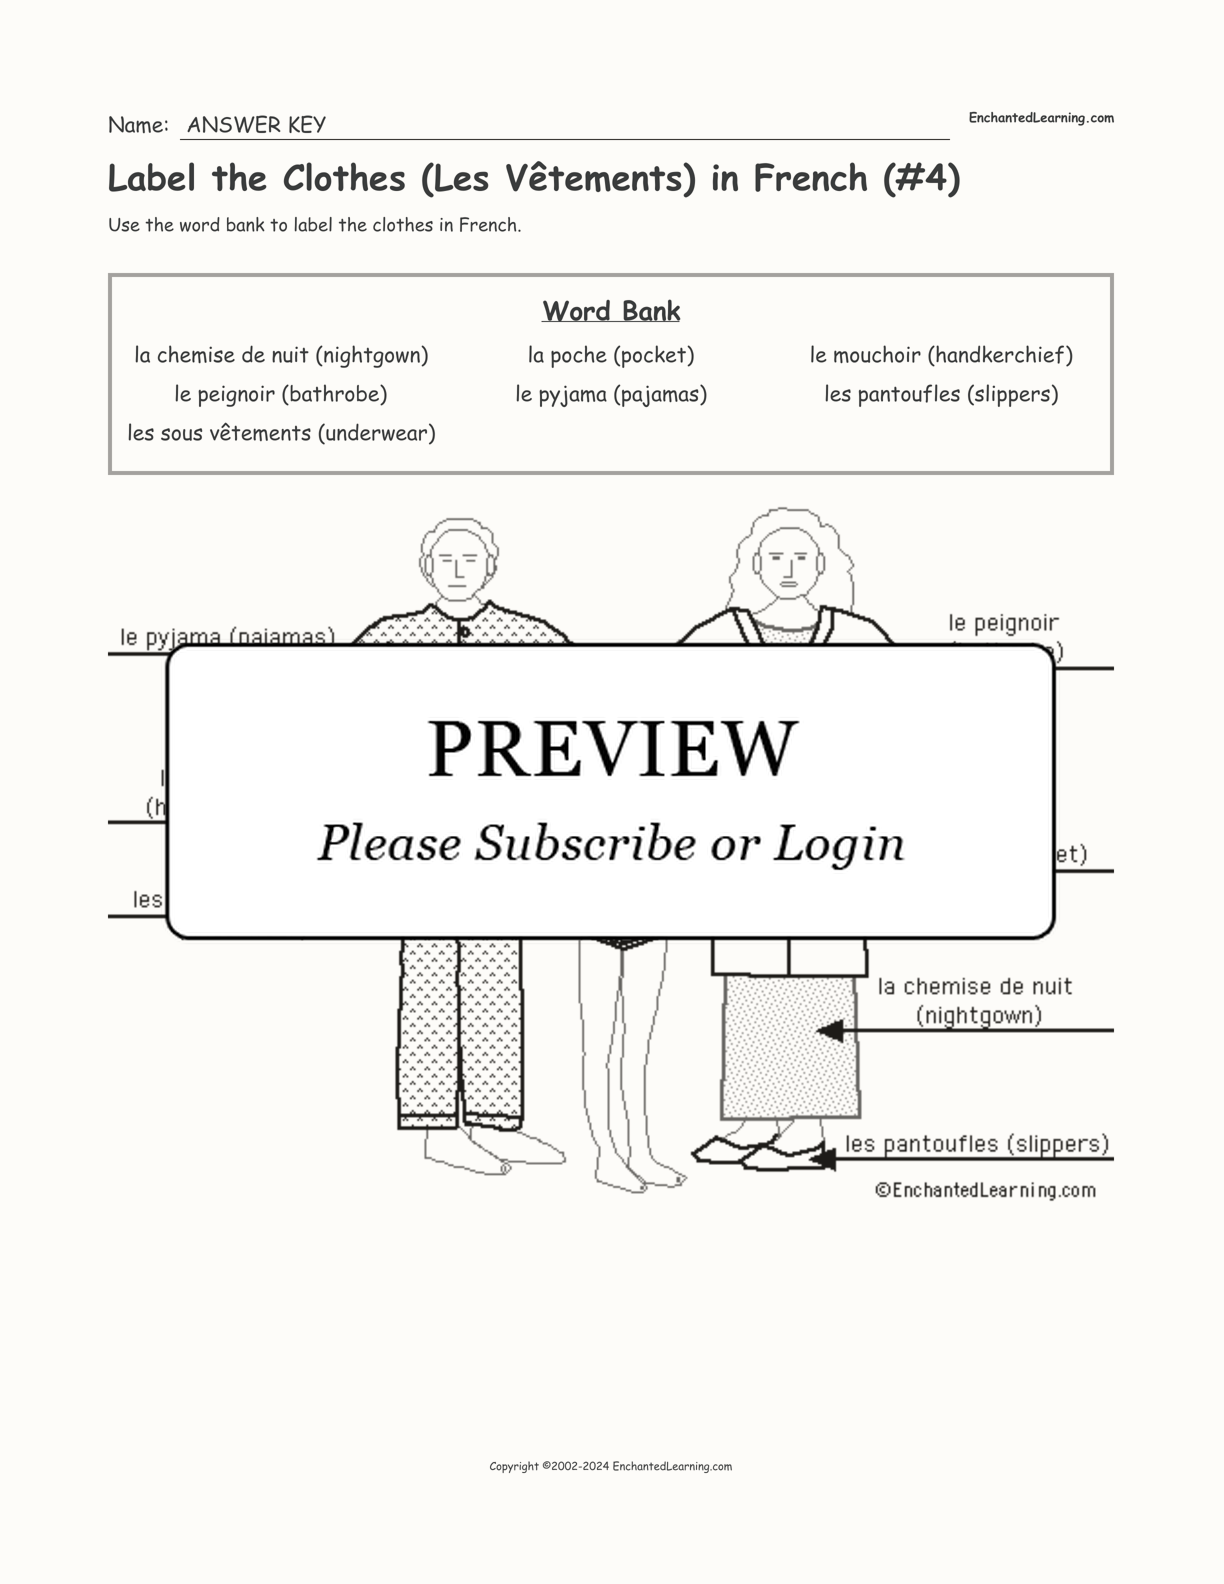 Label the Clothes (Les Vêtements) in French (#4) interactive worksheet page 2